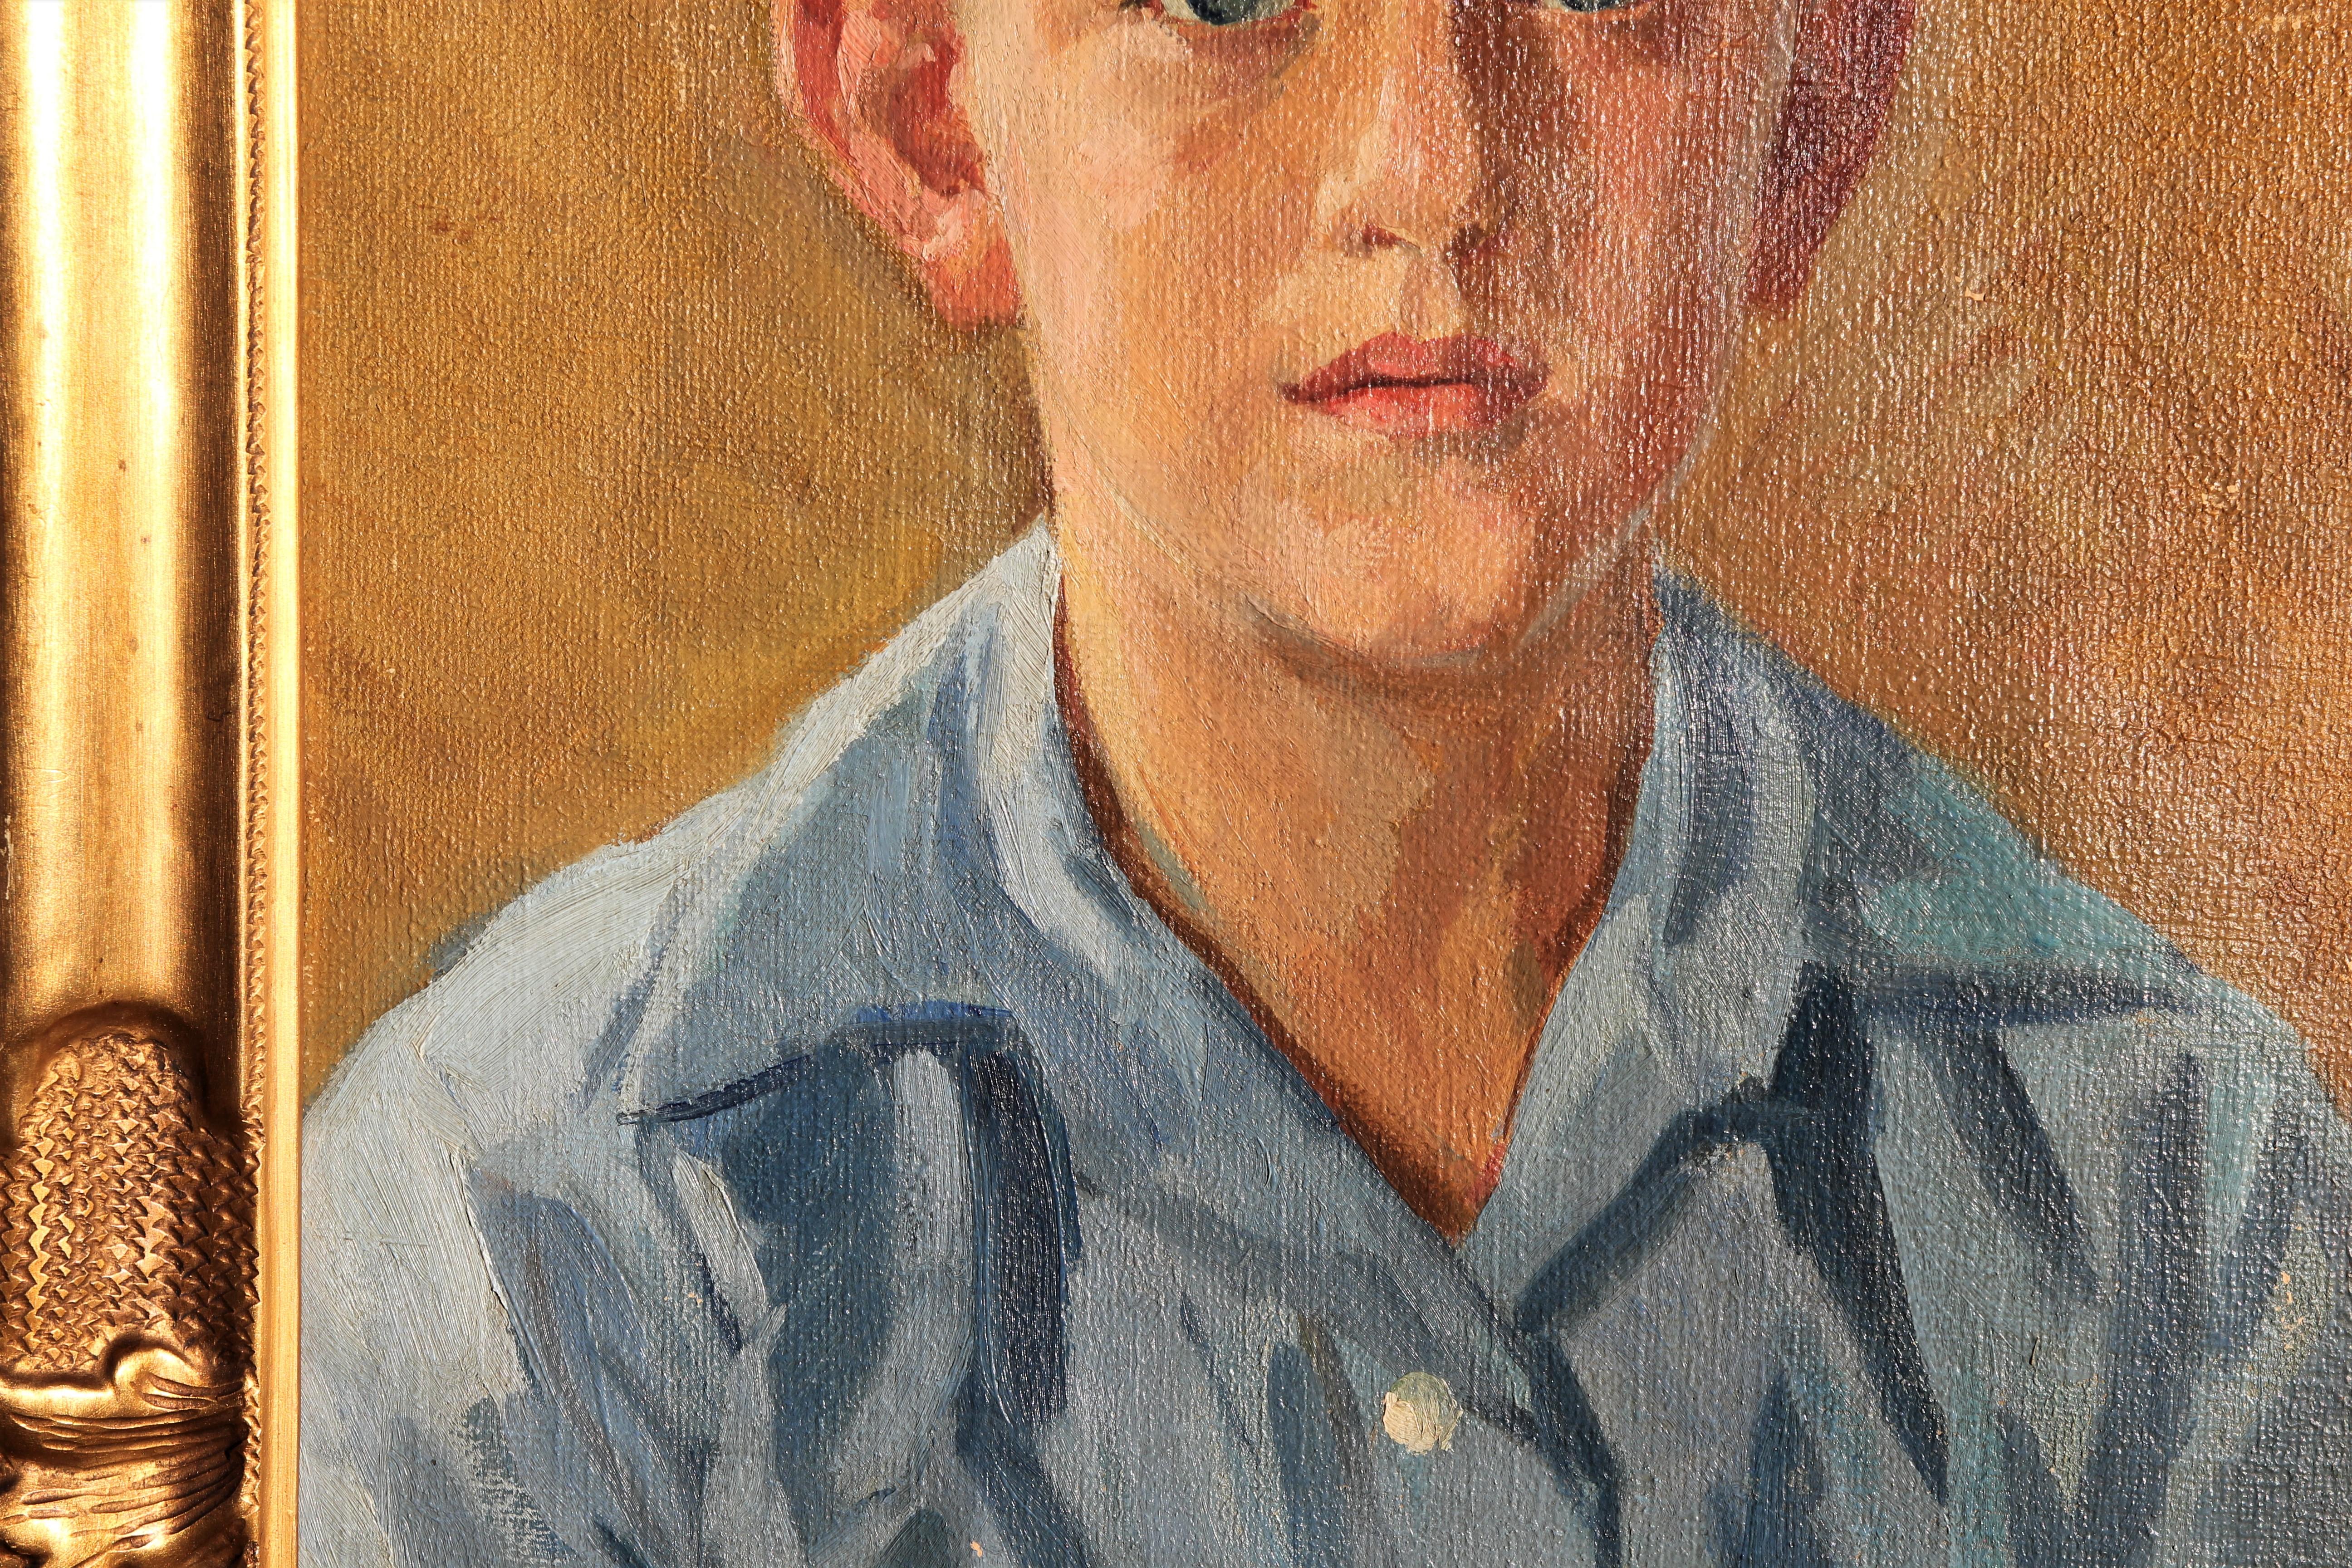 Yellow and blue-toned abstract impressionist portrait of a boy by Danish artist Hans Christian Bärenholdt. Signed by the artist at the bottom right. Hung in a gold carved frame.

Dimensions Without Frame: H 17.63 in. x W 13.75 in.

Artist Biography: